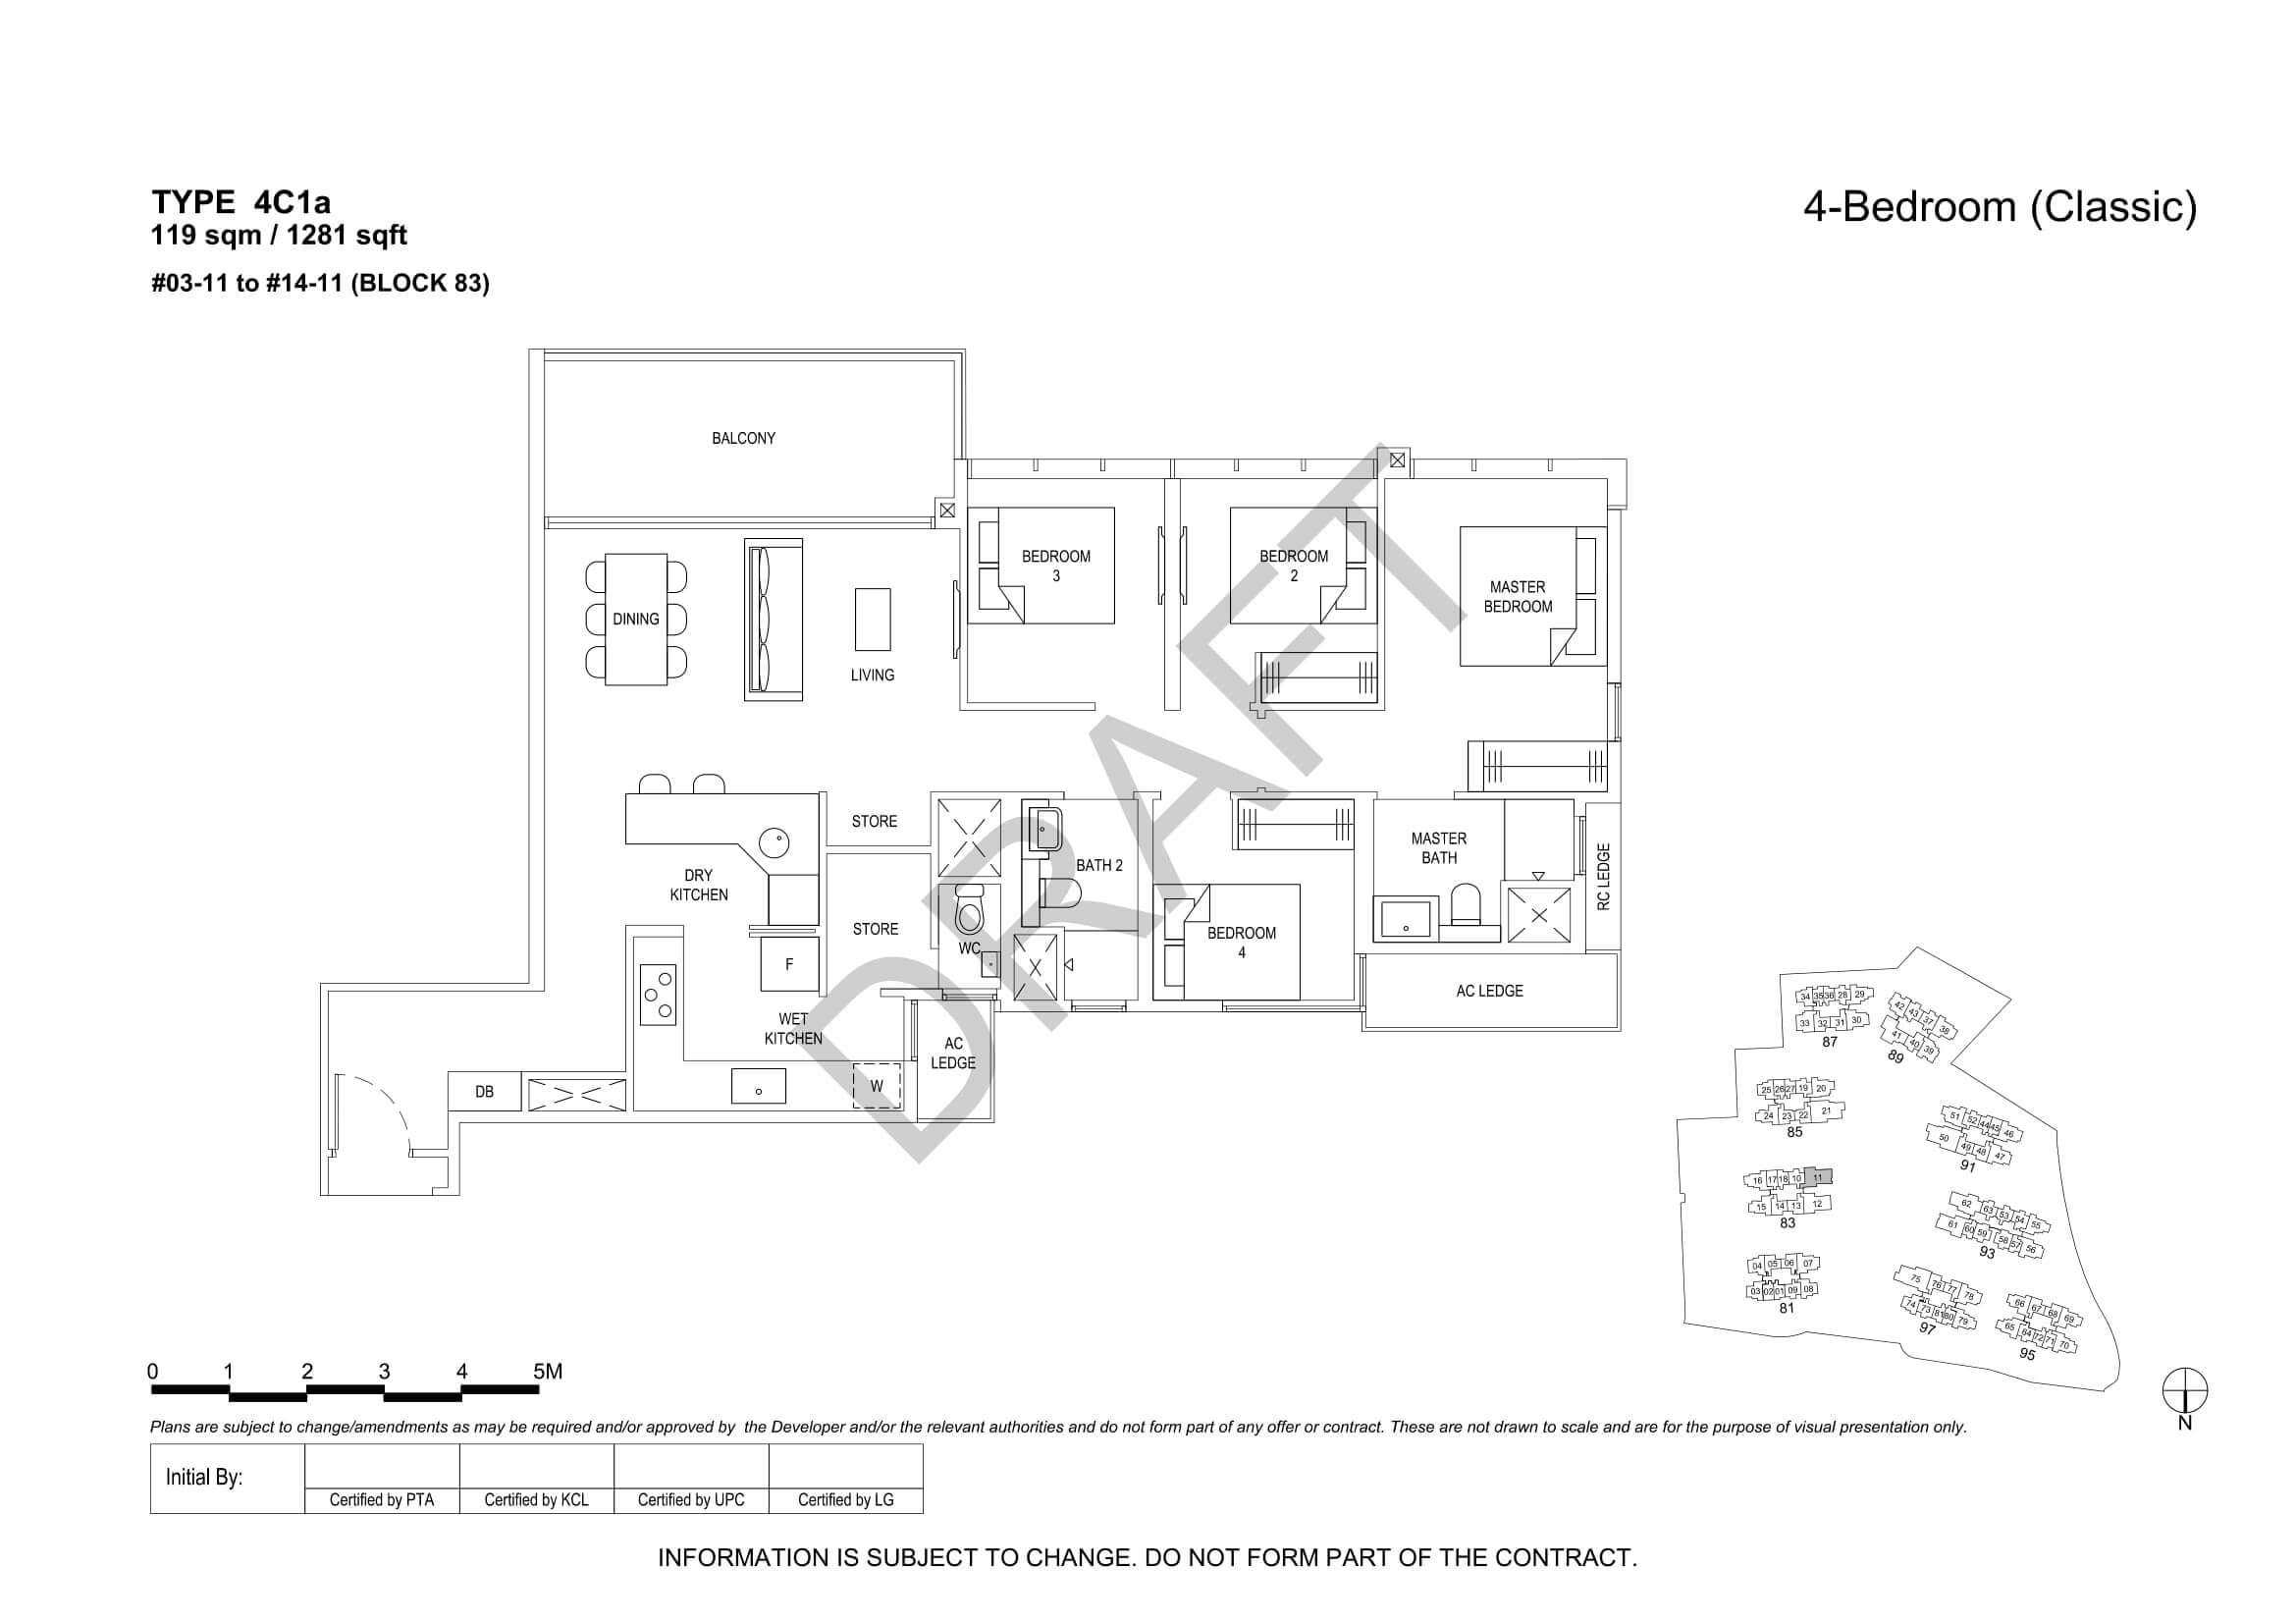 The Florence Residences Floor Plan 4-Bedroom Type 4C1a